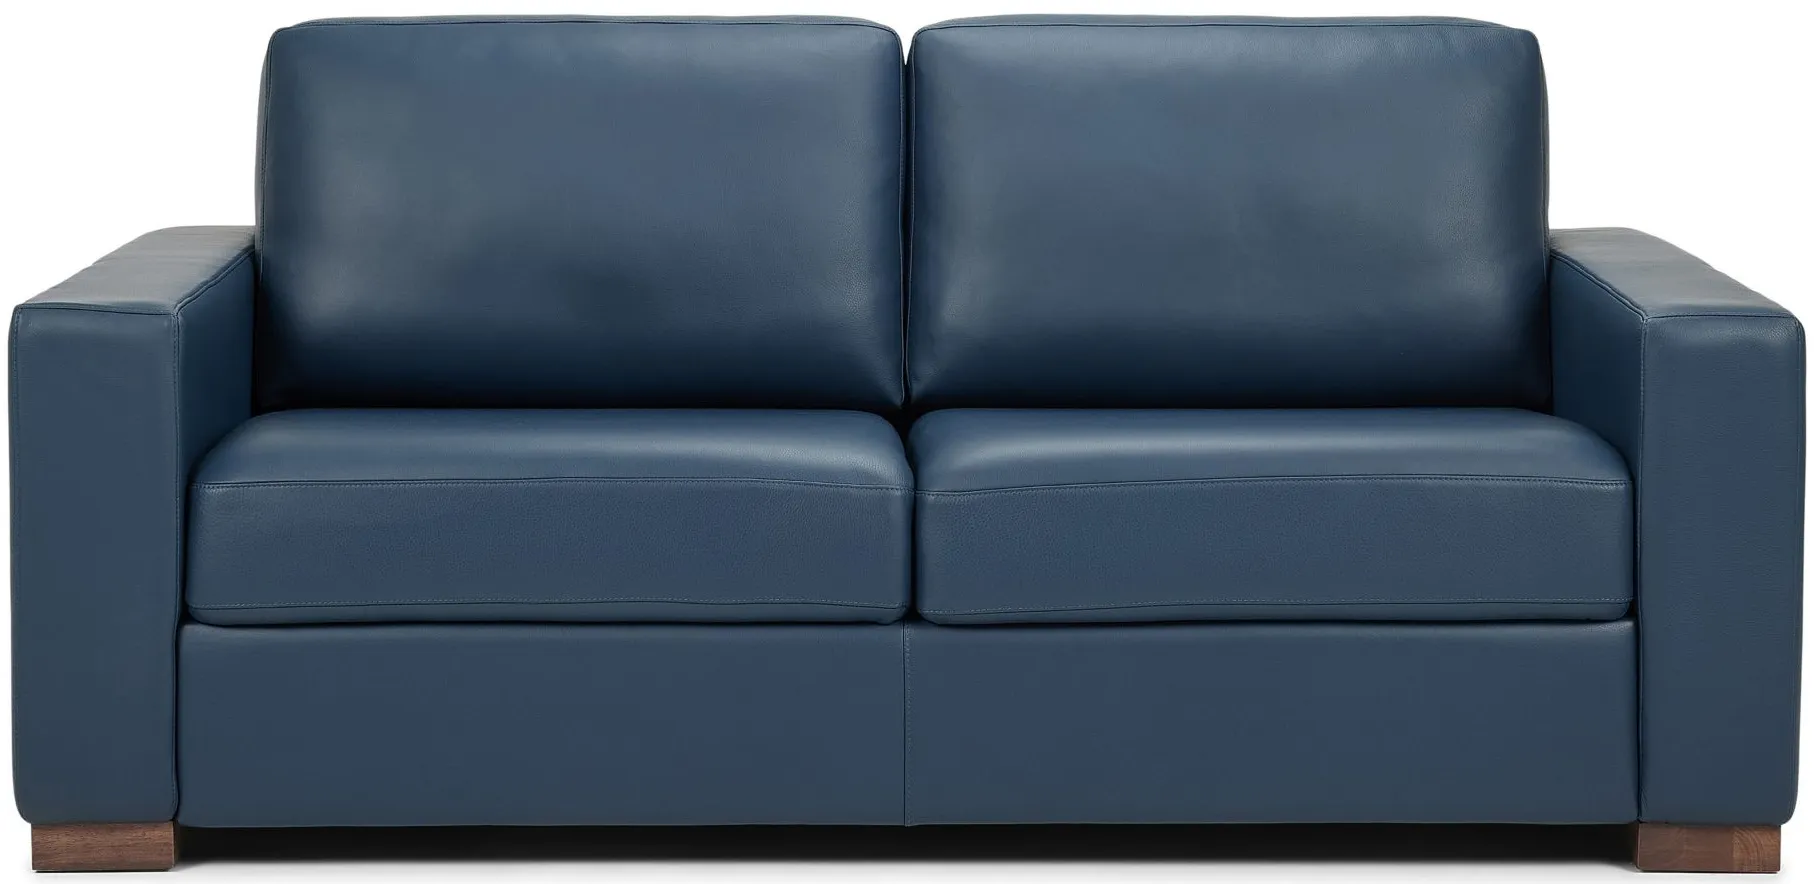 Revere Full Sleeper in Bison Deep Blue by American Leather